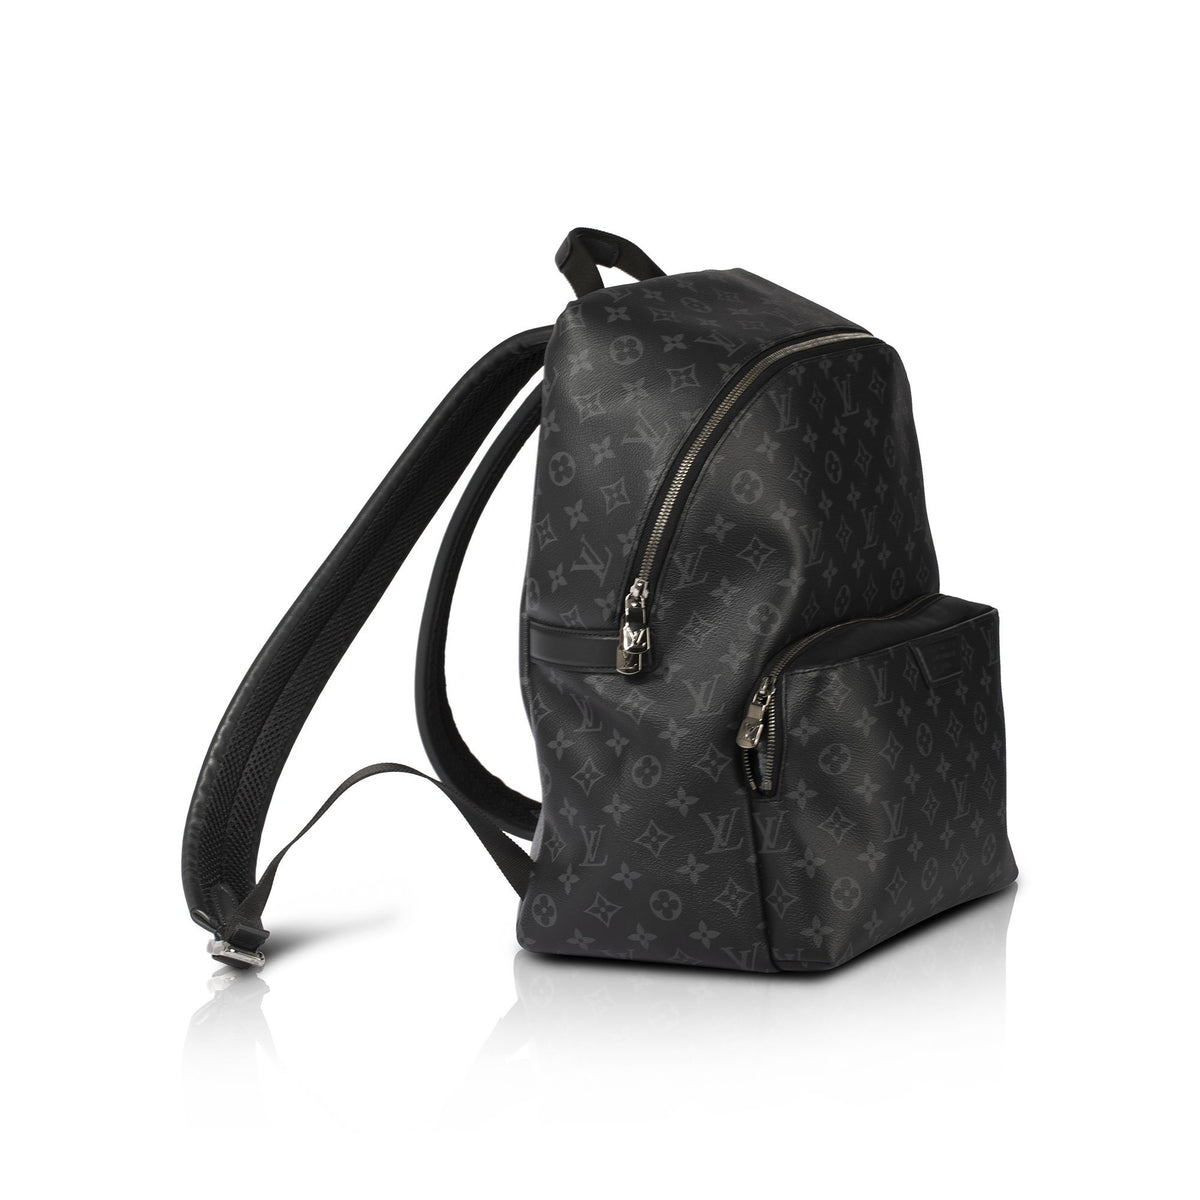 Shop Louis Vuitton Discovery Discovery Backpack Pm (DISCOVERY PM